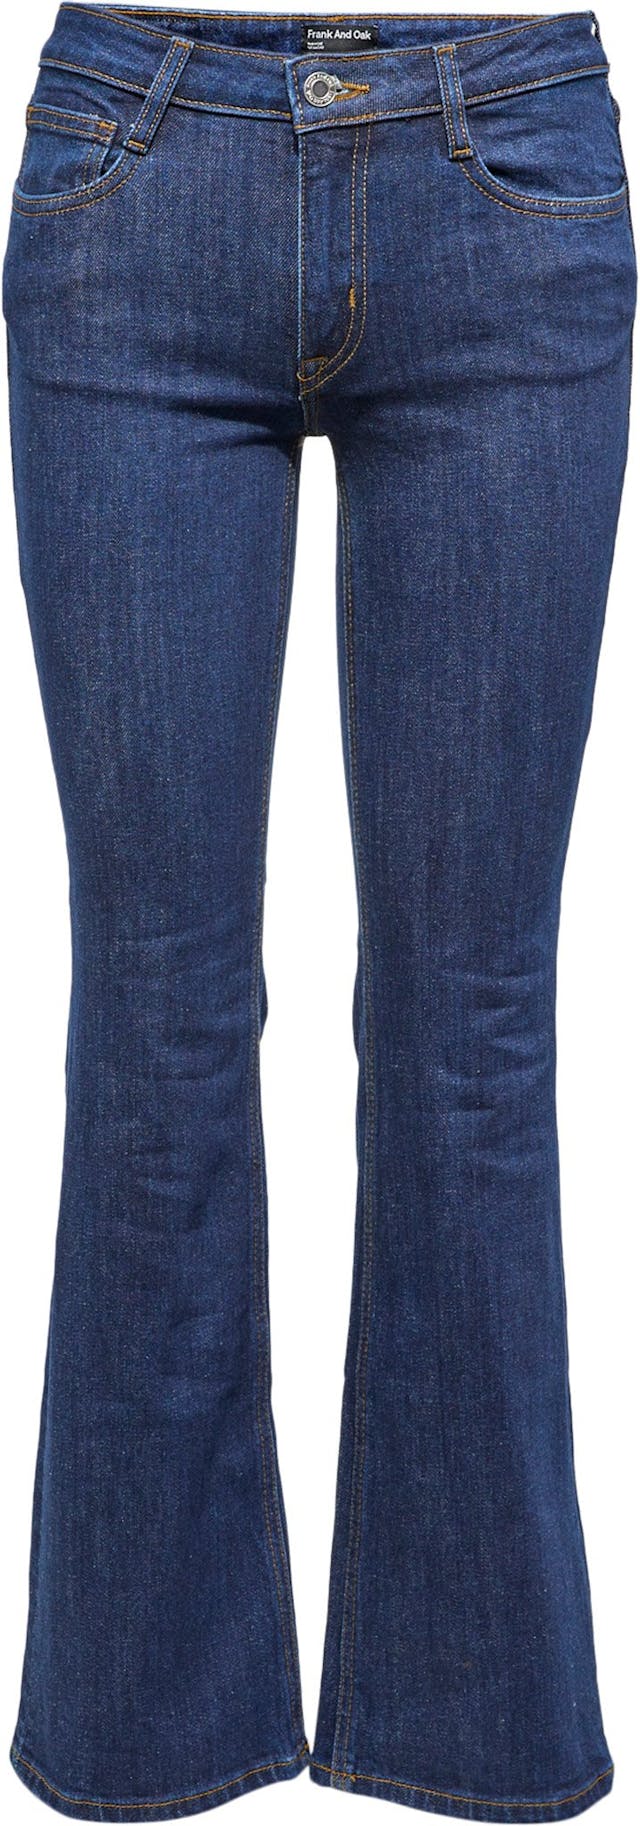 Product image for Joan Mid Rise Boot Cut Jeans - Women's